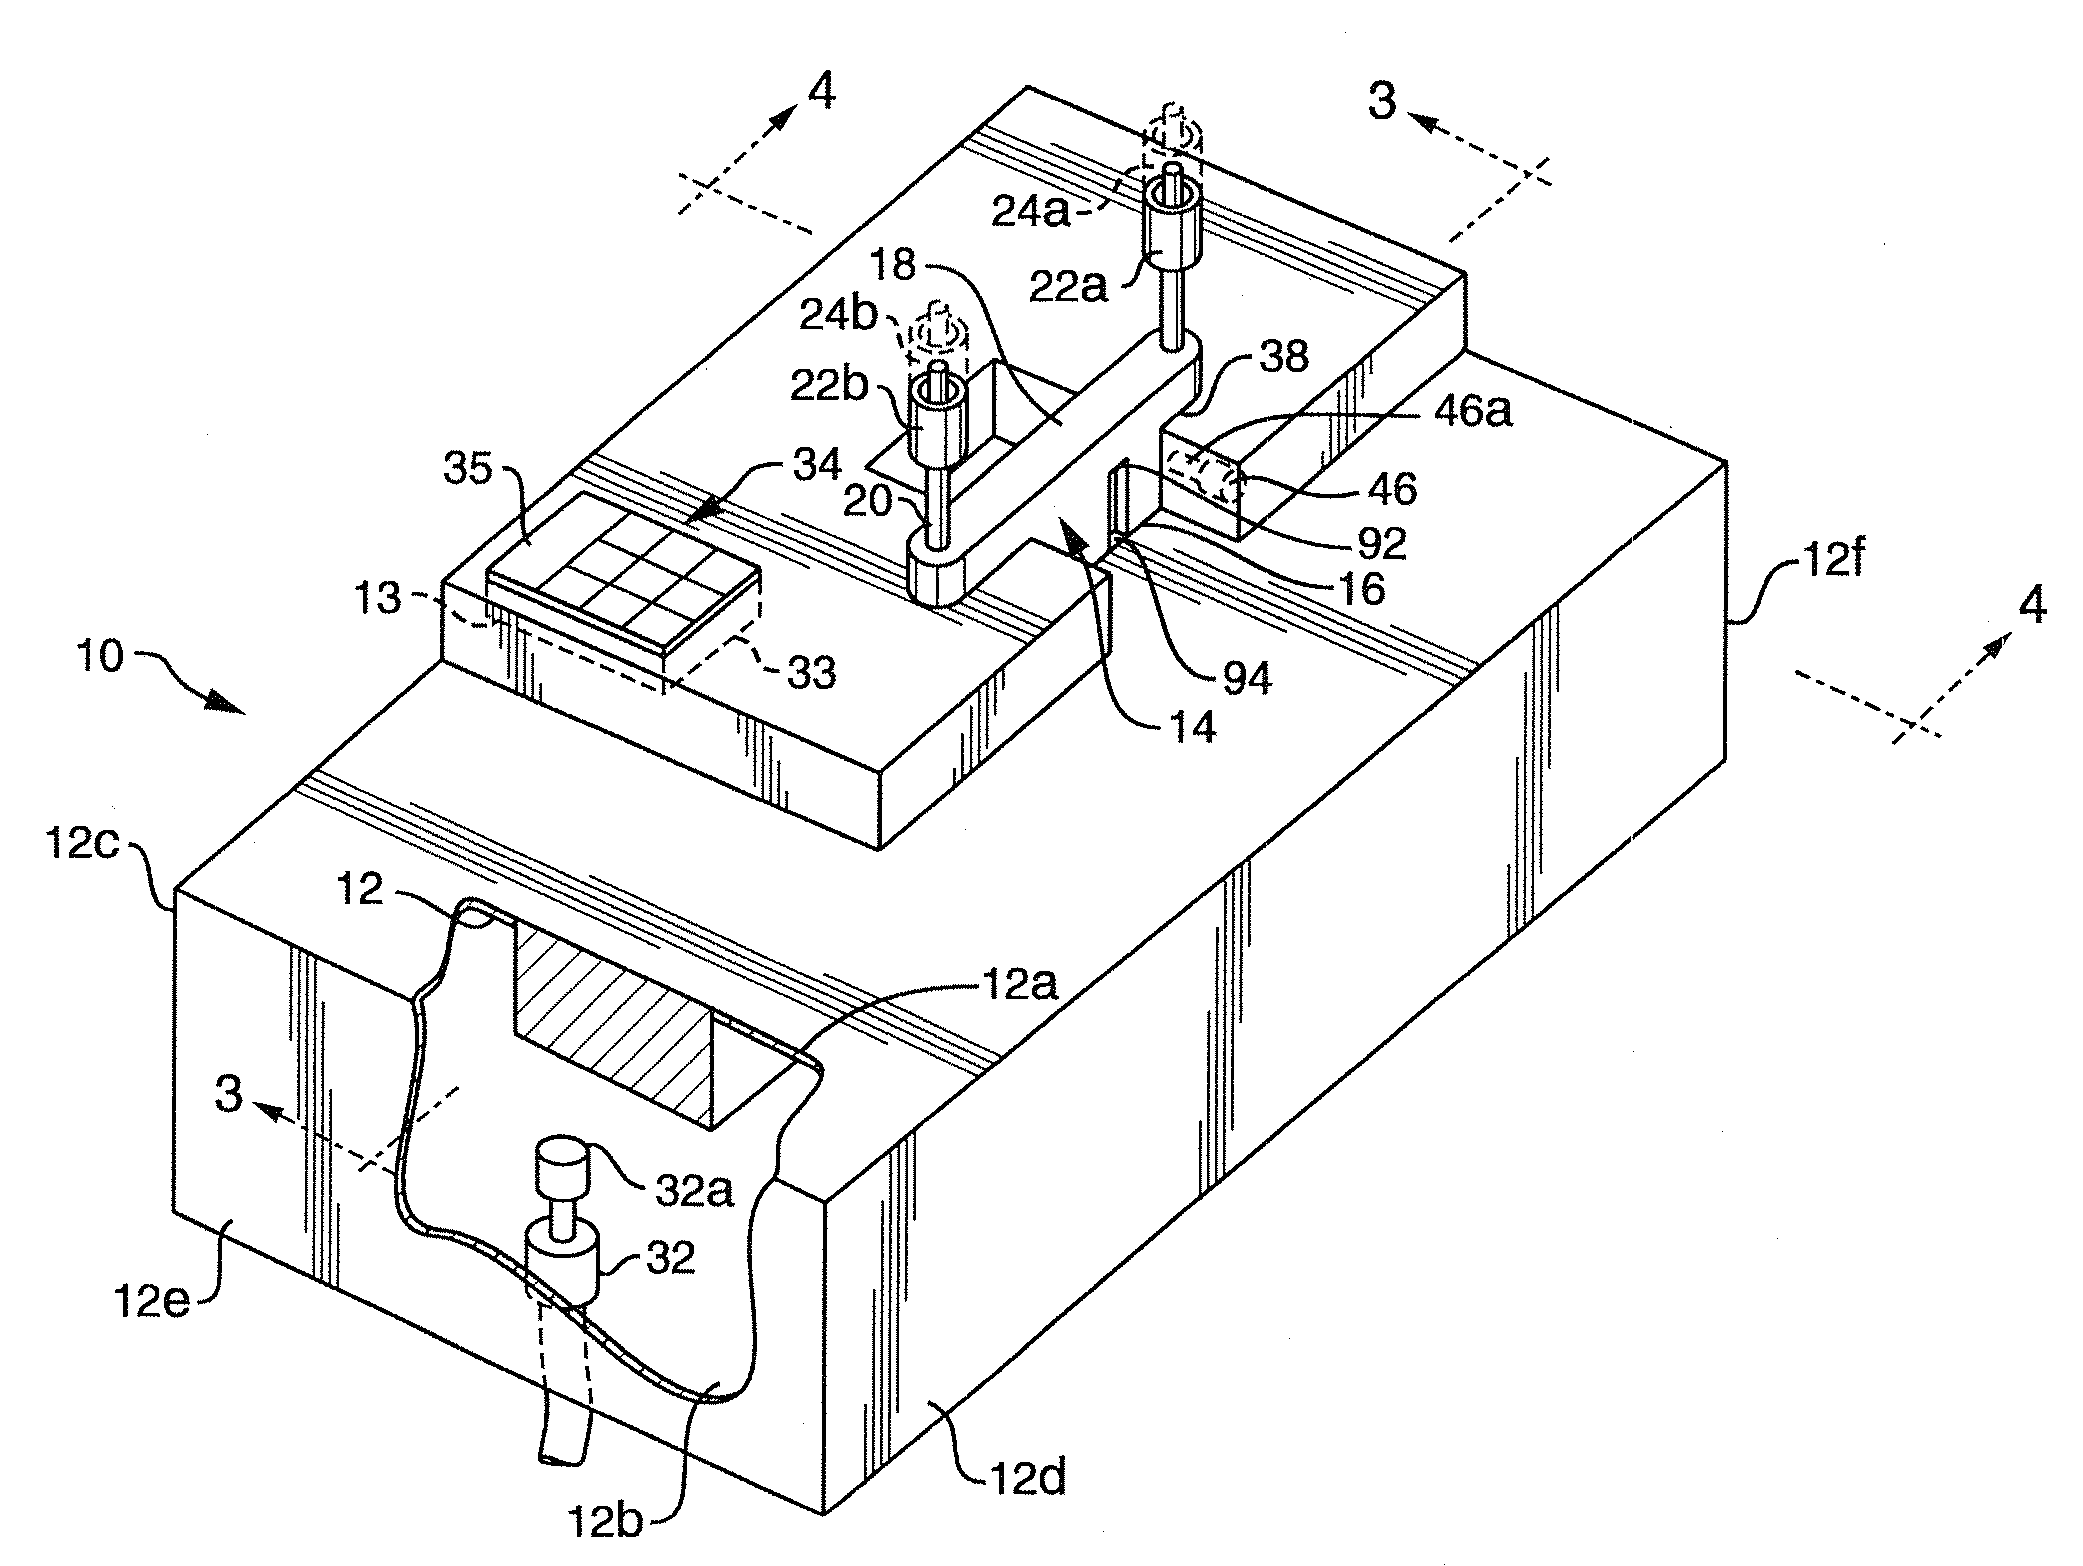 In-line microwave warming apparatus